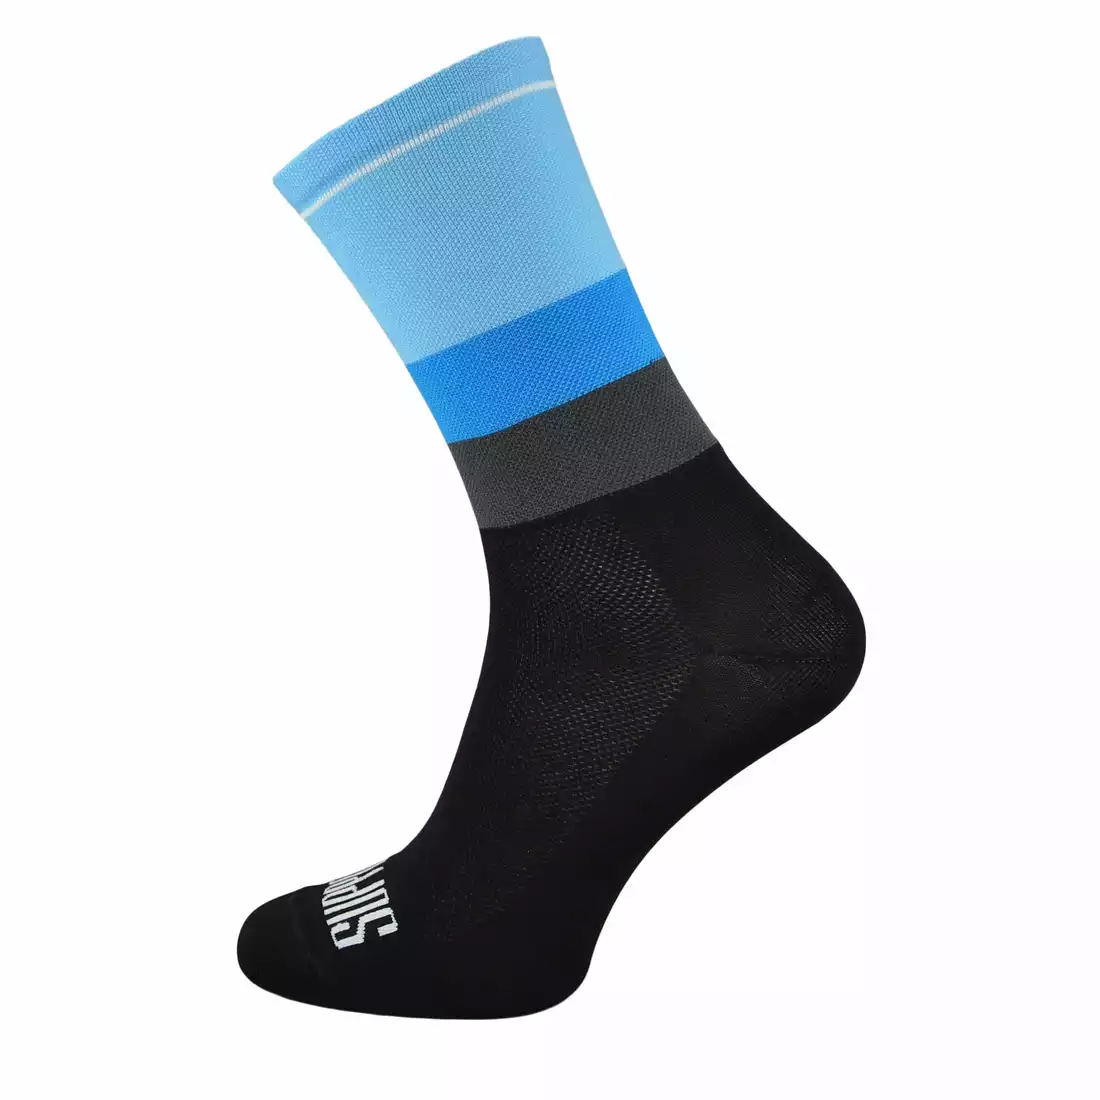 SUPPORTSPORT cycling socks TONE'S BLUE